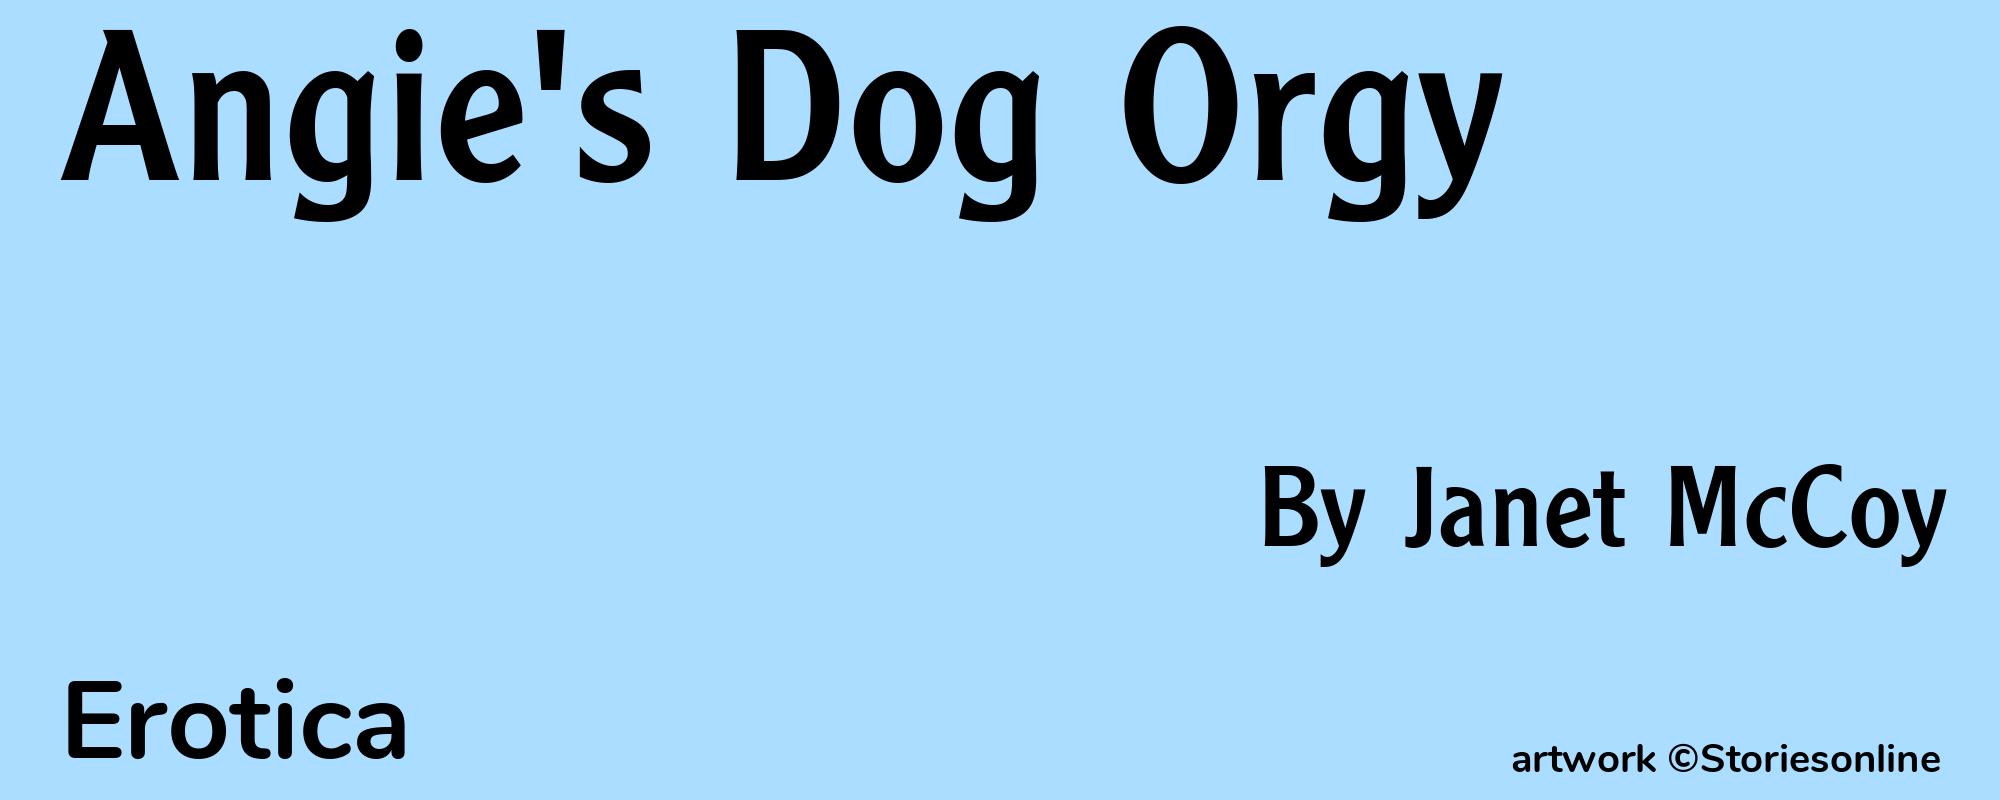 Angie's Dog Orgy - Cover